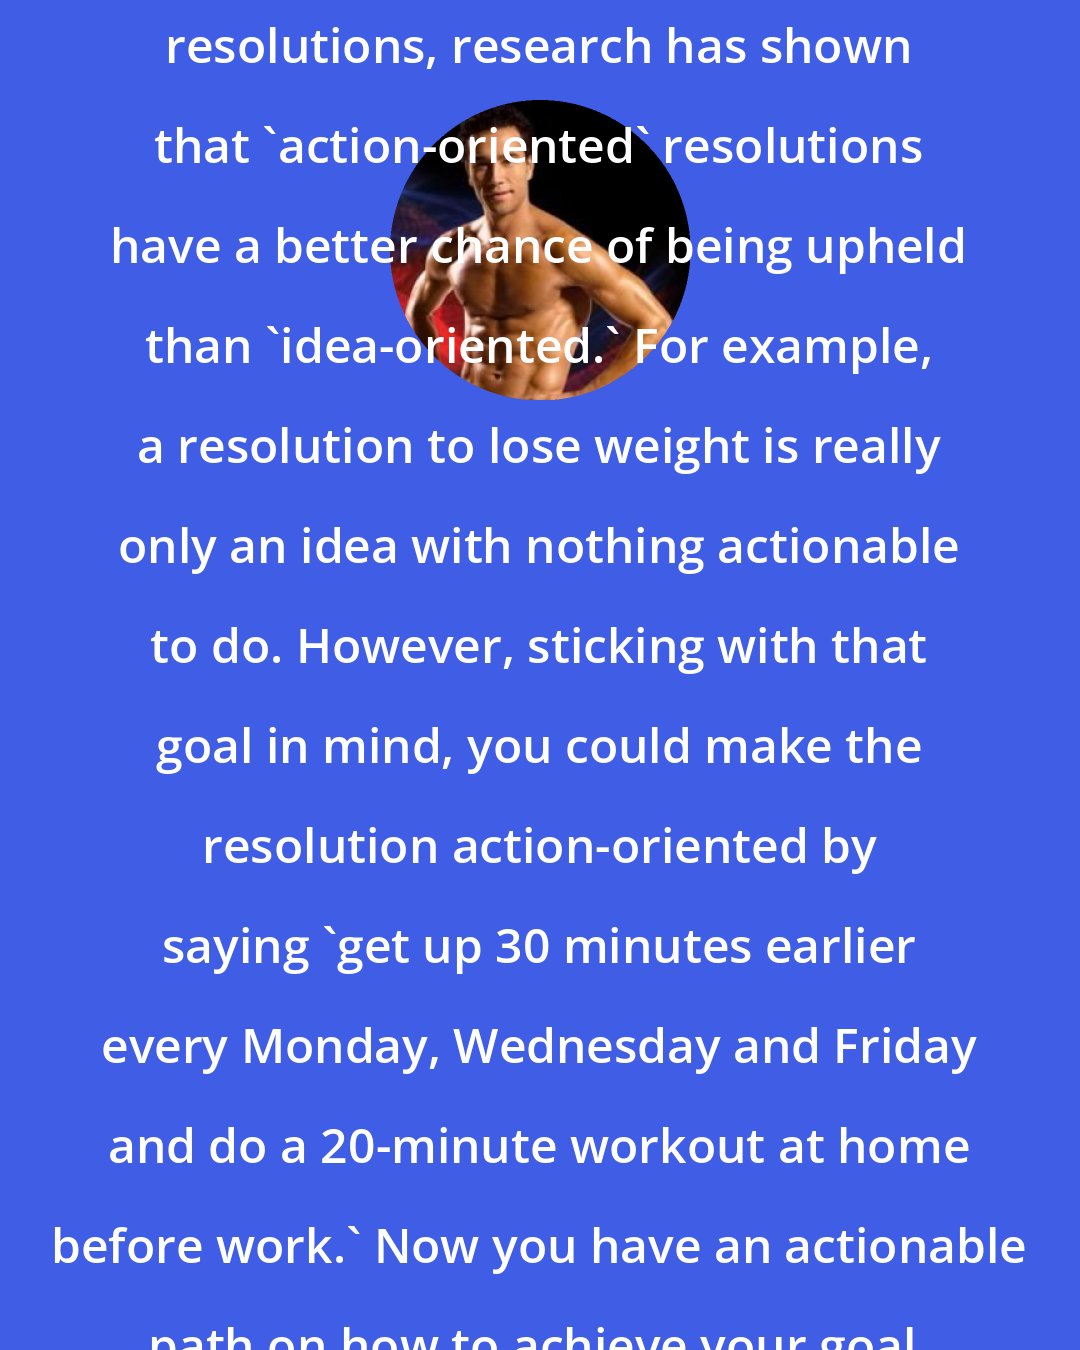 Brett Hoebel: When it comes to sticking to your resolutions, research has shown that 'action-oriented' resolutions have a better chance of being upheld than 'idea-oriented.' For example, a resolution to lose weight is really only an idea with nothing actionable to do. However, sticking with that goal in mind, you could make the resolution action-oriented by saying 'get up 30 minutes earlier every Monday, Wednesday and Friday and do a 20-minute workout at home before work.' Now you have an actionable path on how to achieve your goal.